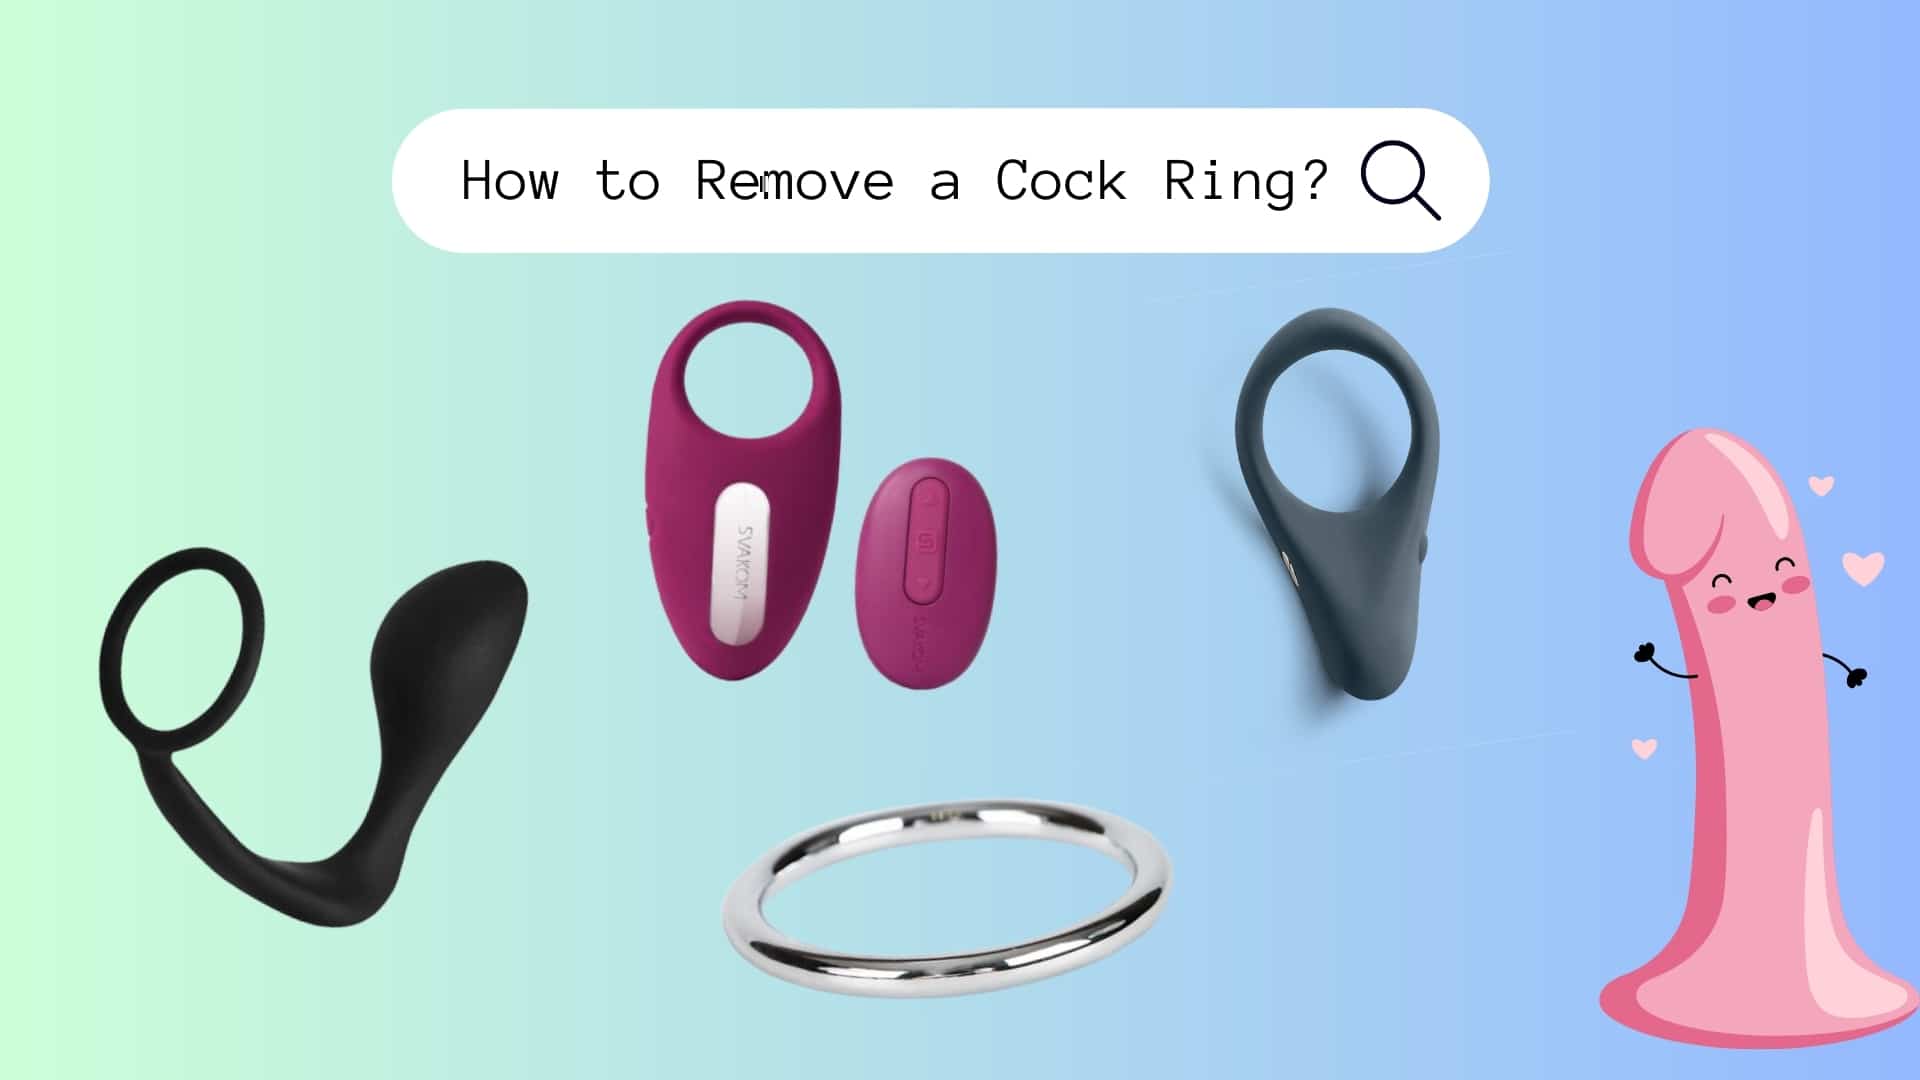 How to Remove a Cock Ring?